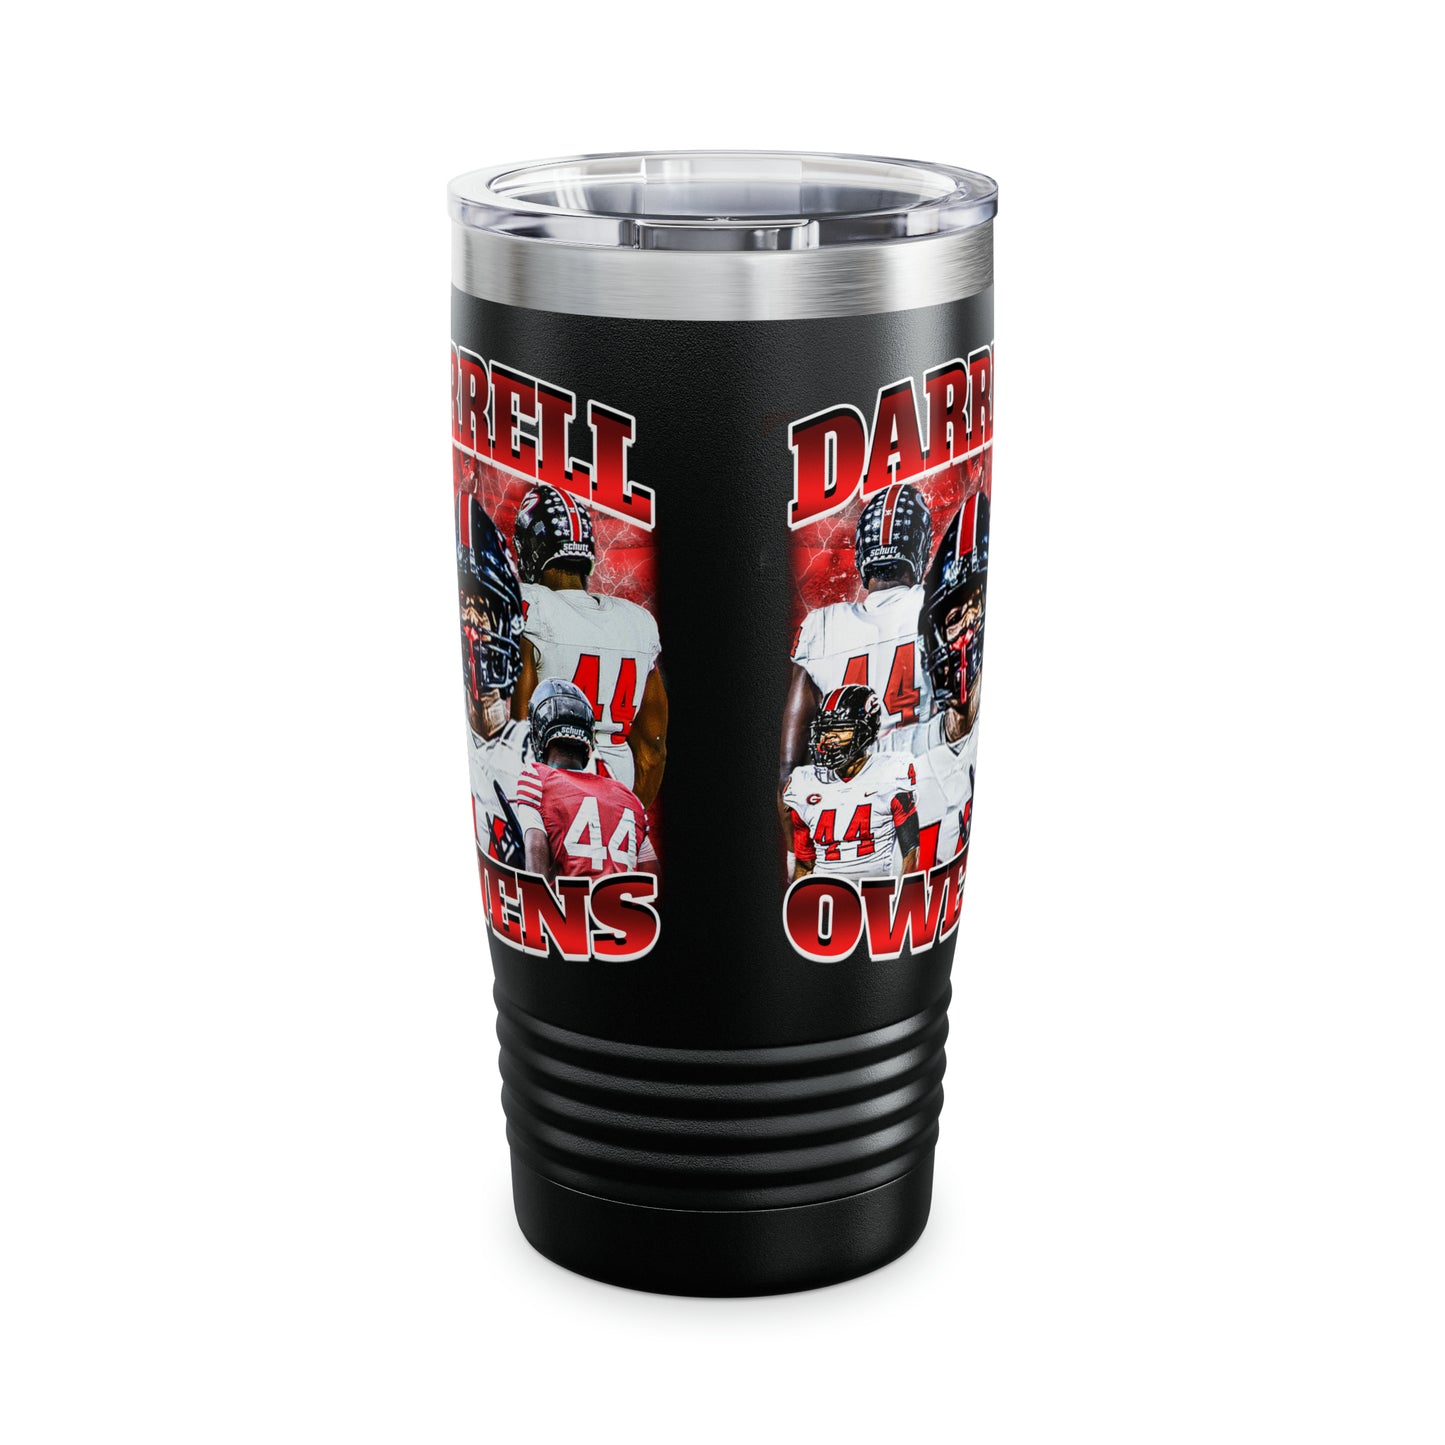 Darrell Owens Stainless Steel Tumbler